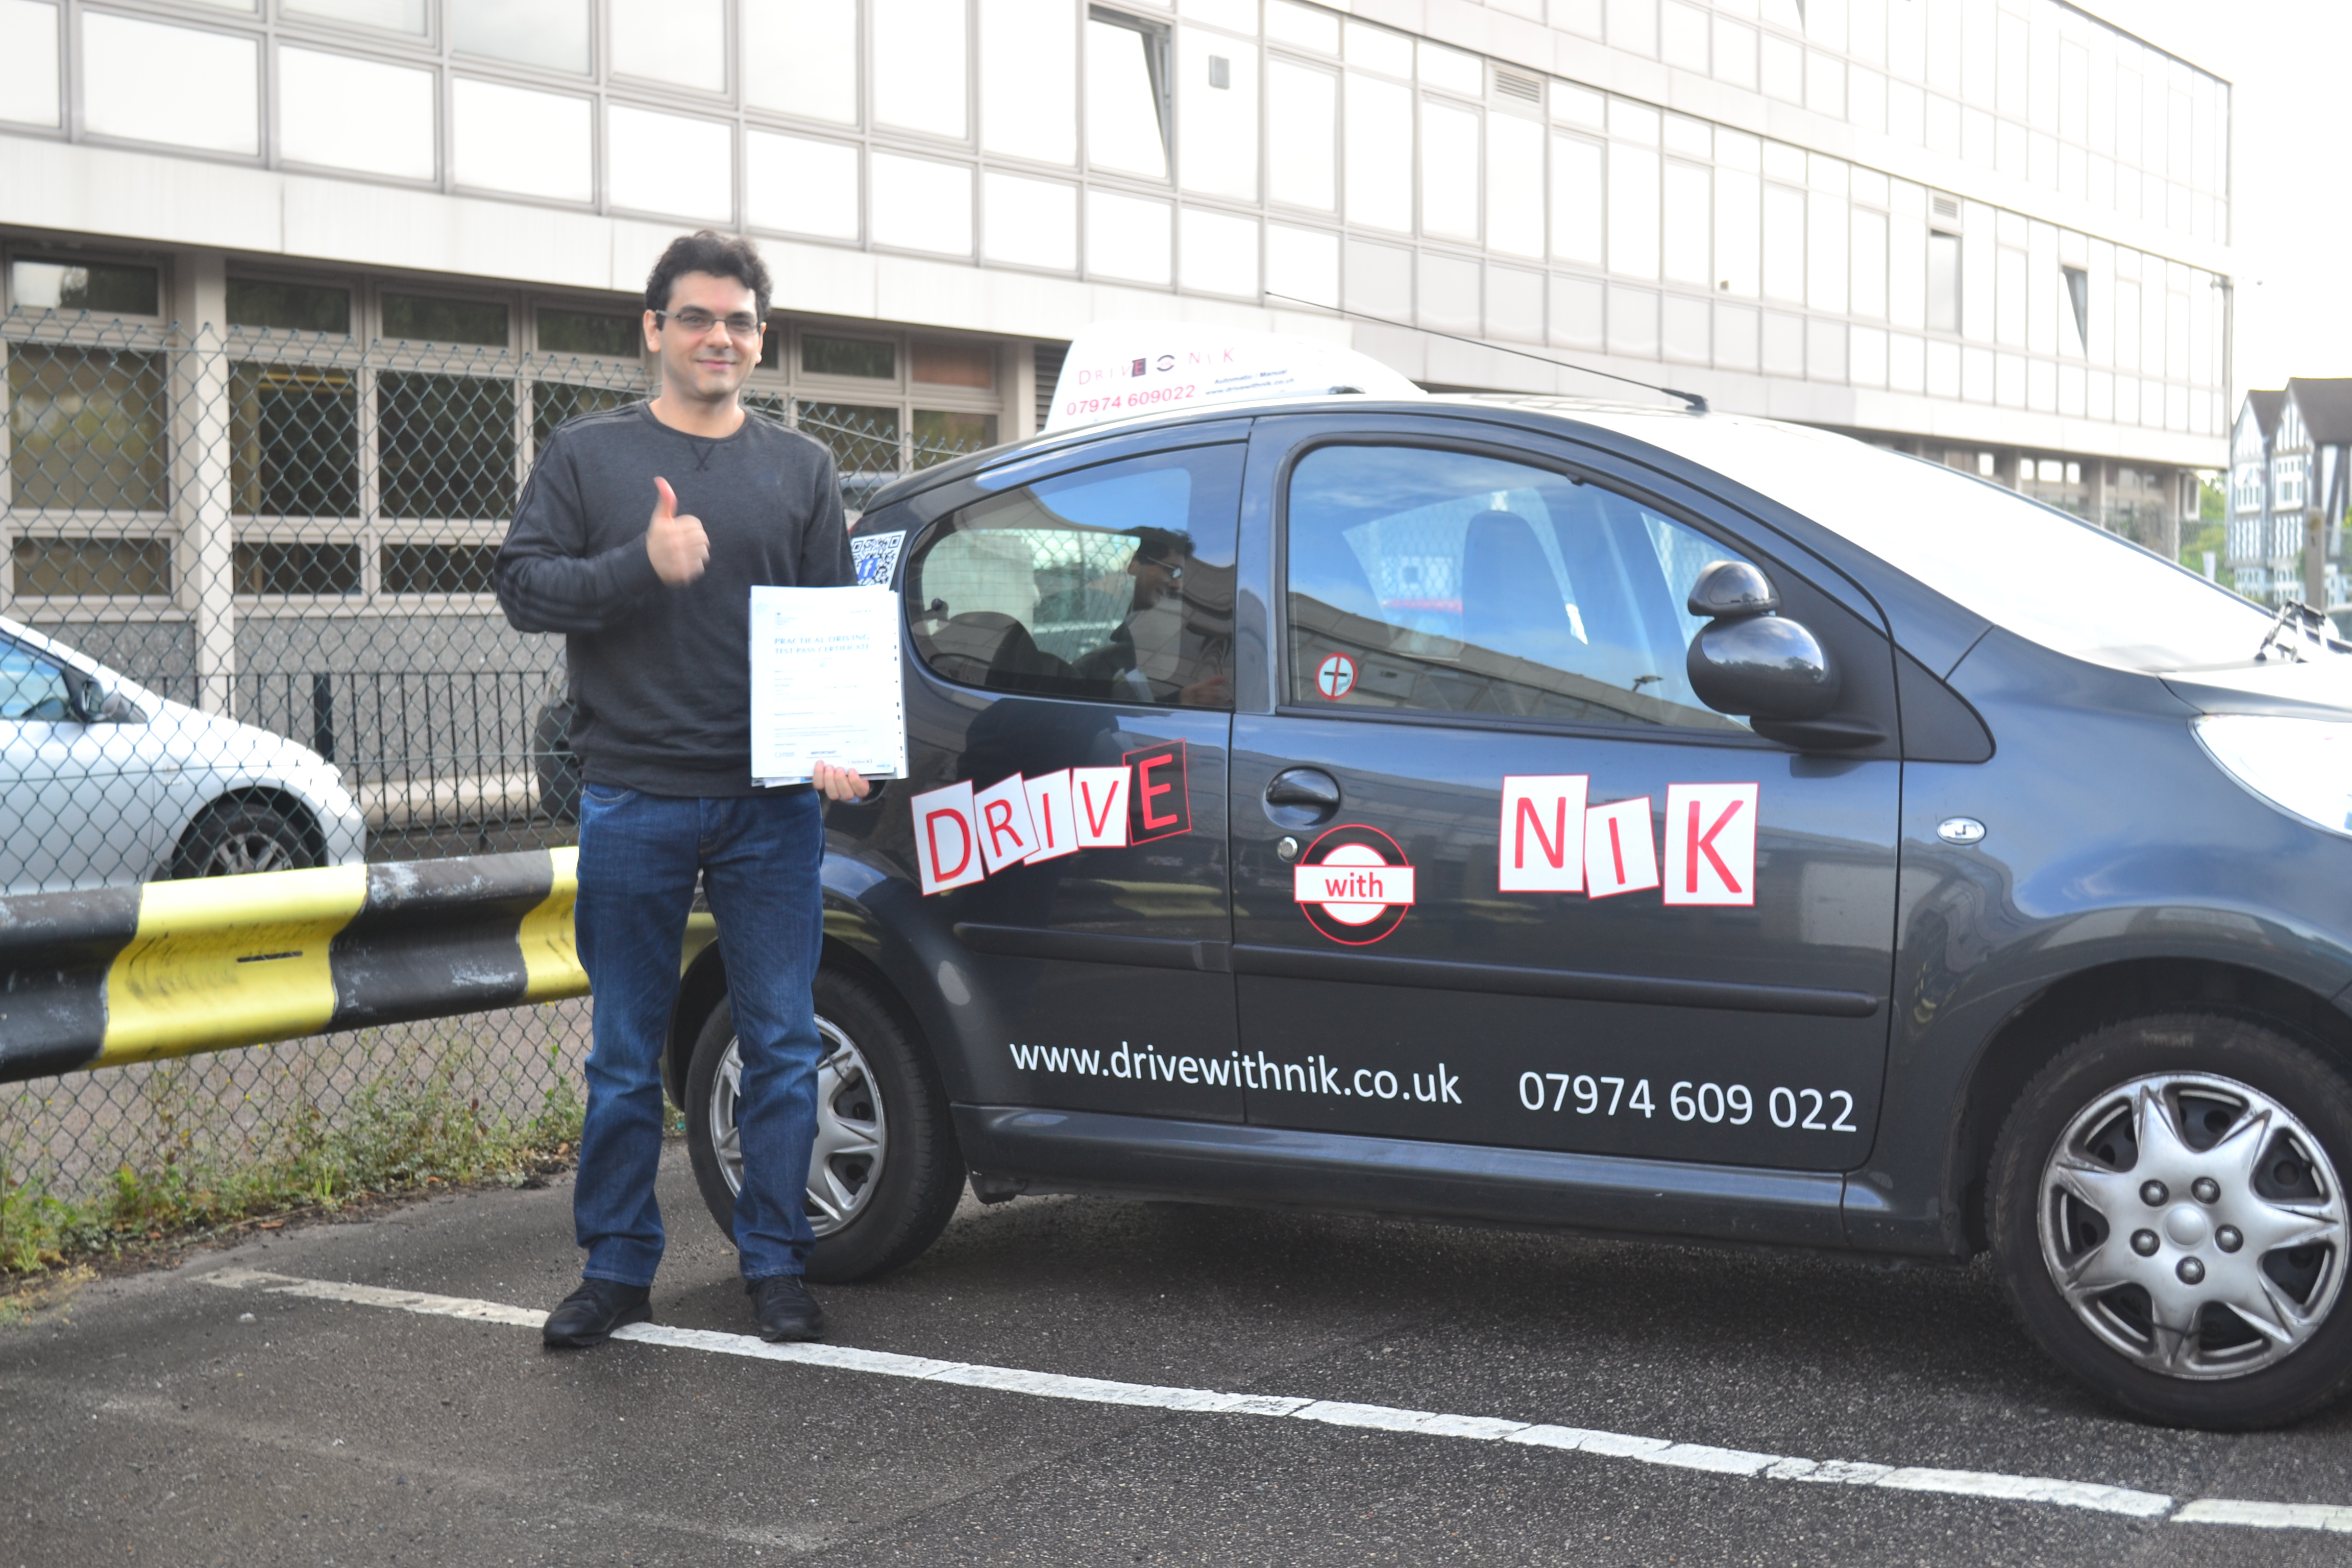 Driving lessons North Finchley Stavor passed his practical driving test first time with Drive with Nik